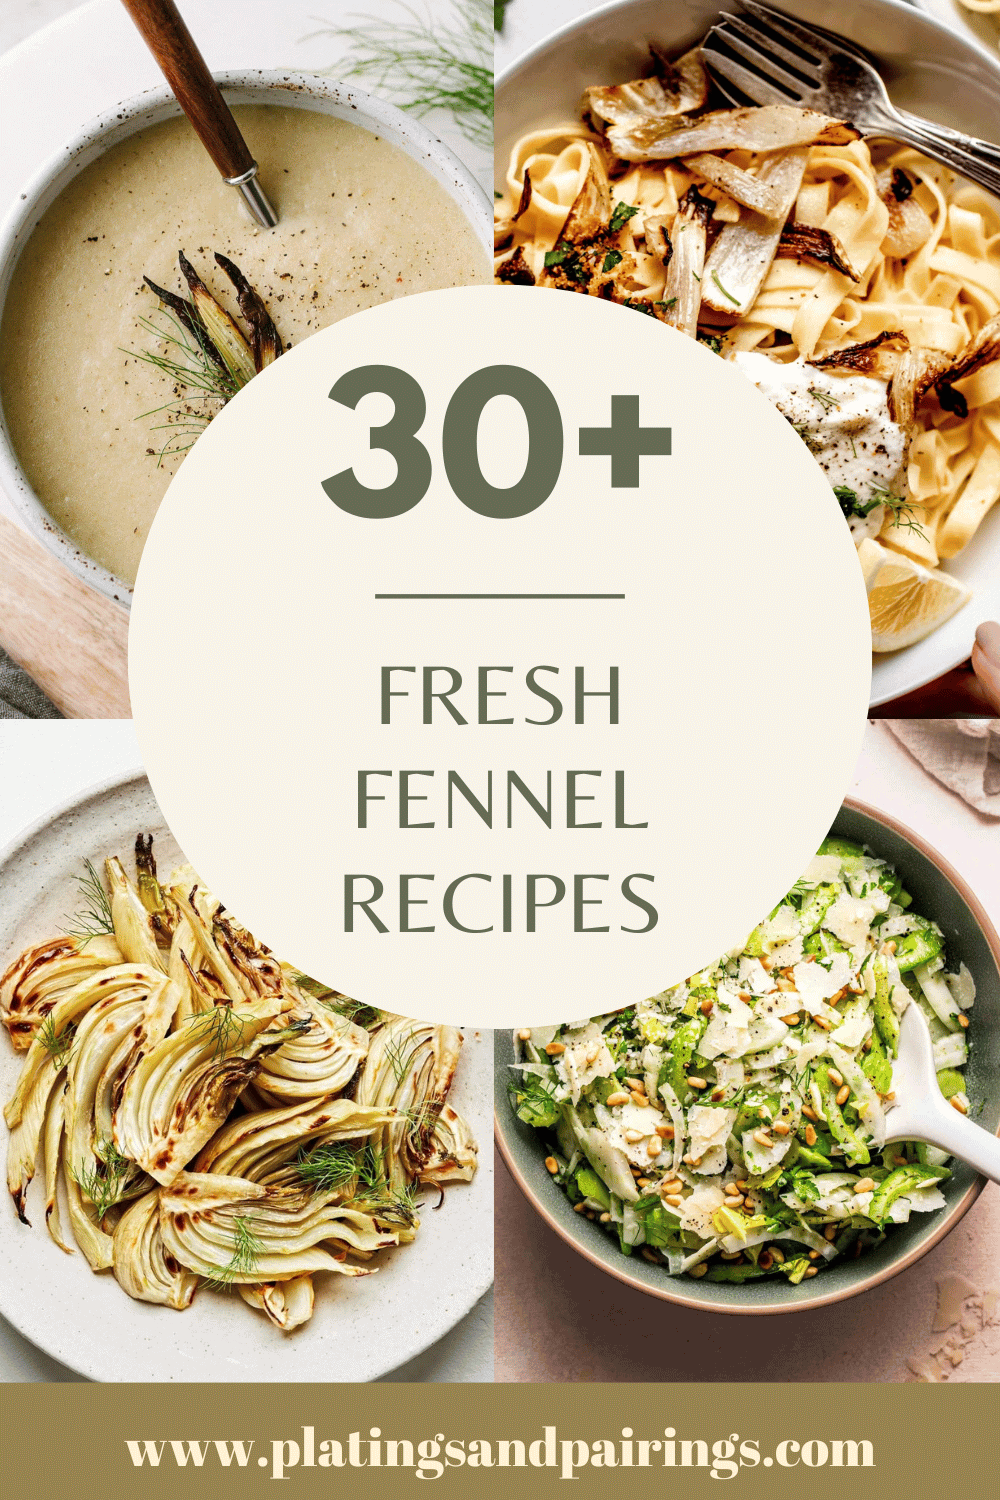 Collage of fennel recipes with text overlay.